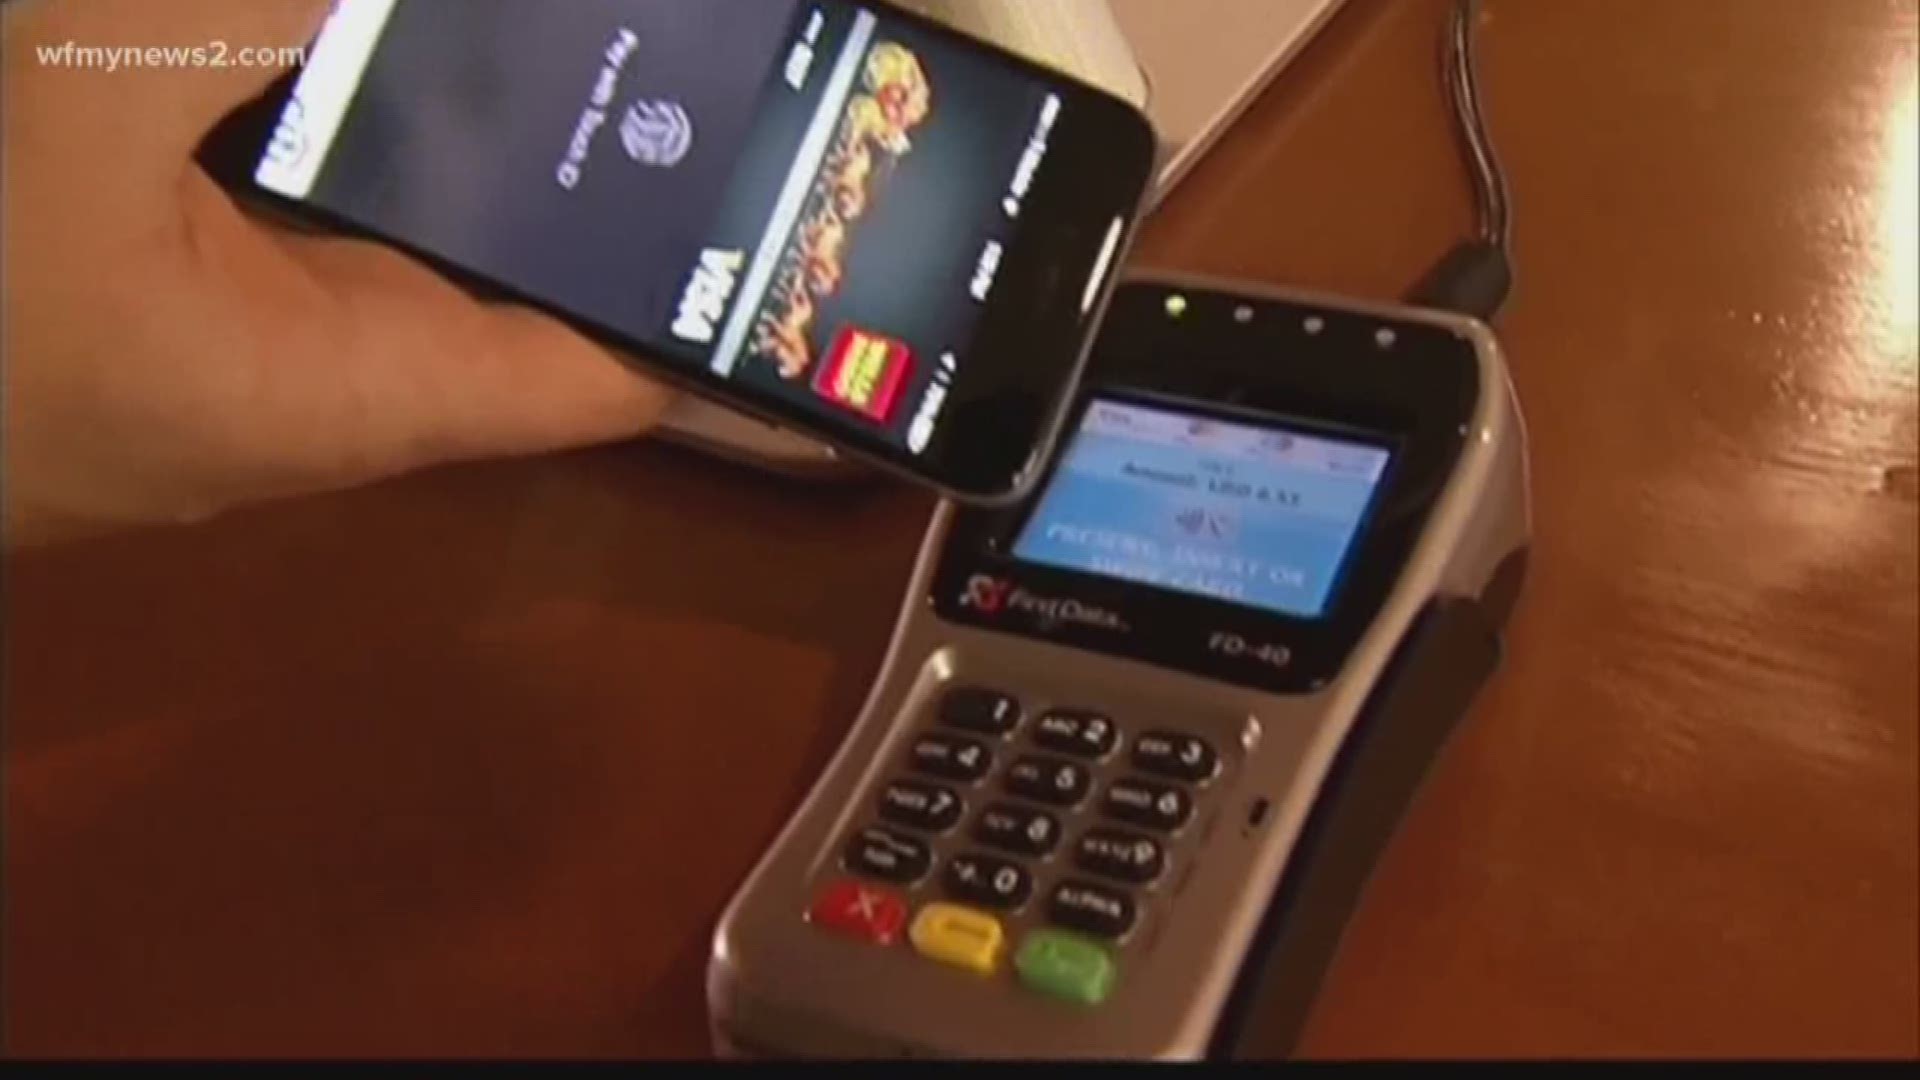 Cash used to be king, then came swiping plastic cards; now folks use digital wallets. But are they safe? We verify.